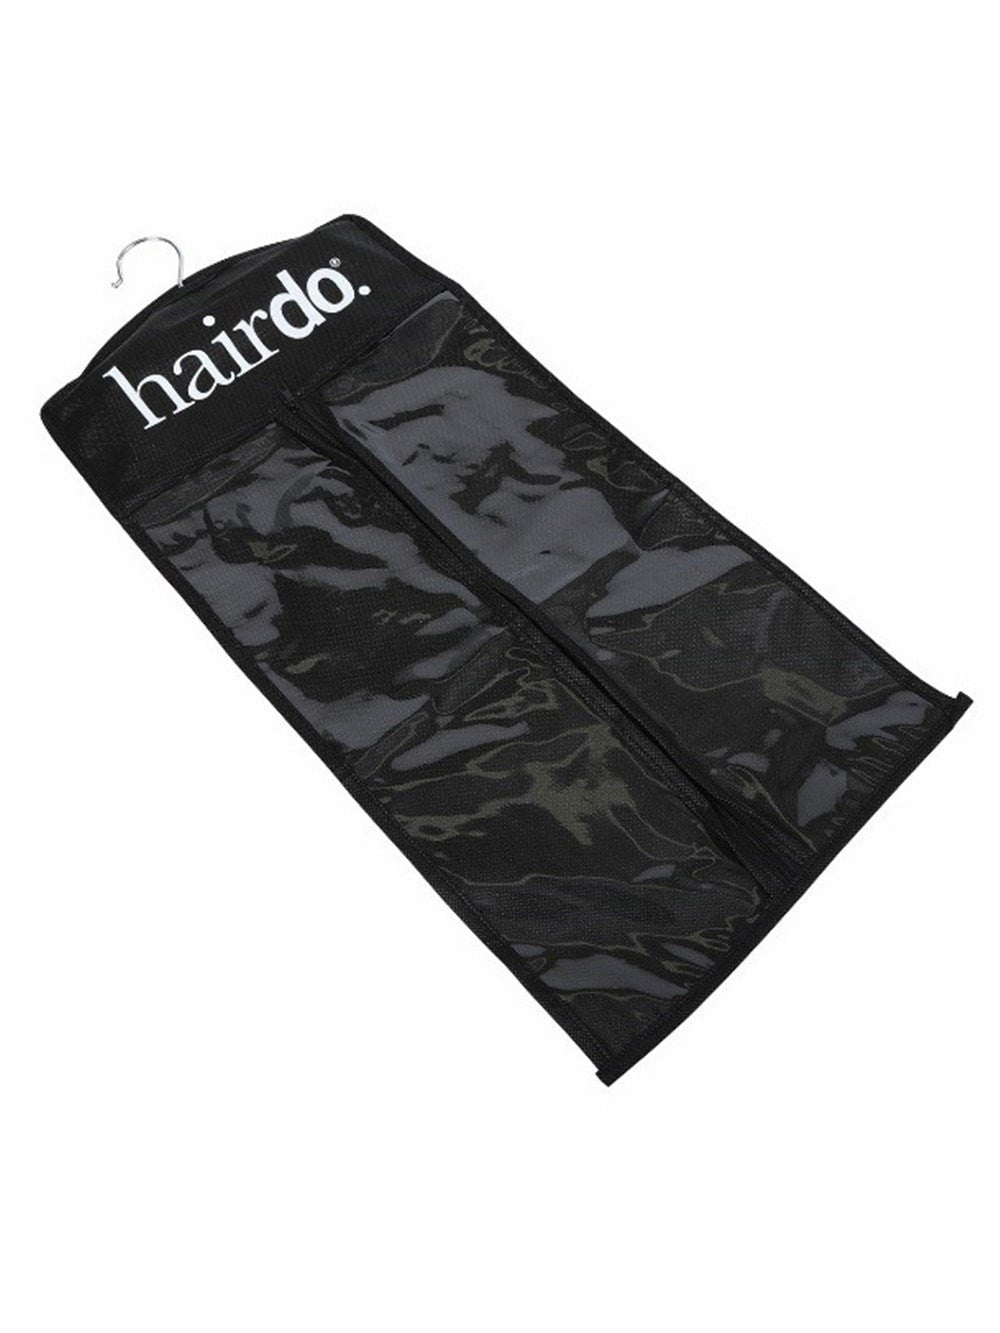 Hair Extensions Bag & Hanger by Hairdo | Great for Clip In Extensions